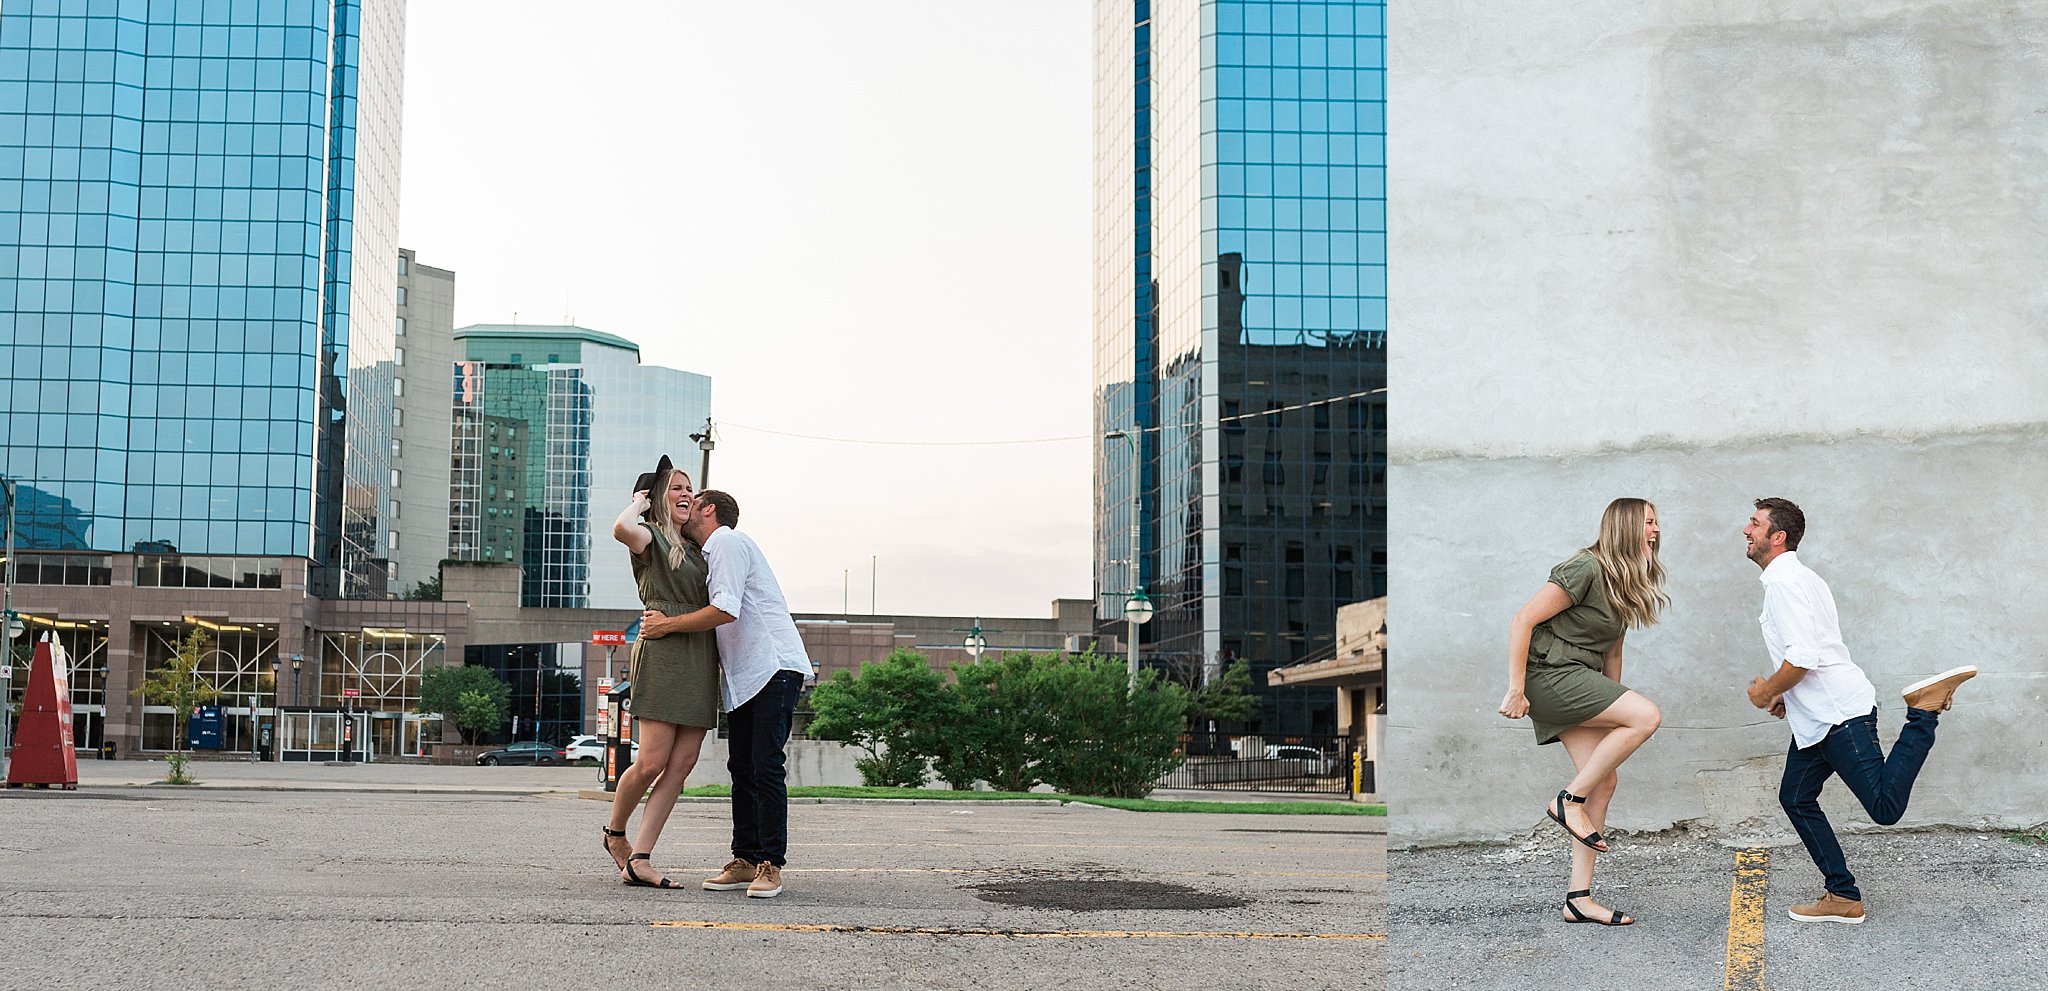 Downtown, London, Ontario, engagement, session, Wesley, Forbes, Photographer, Port Stanley, Windsor, Kitchener, Waterloo, Wedding, Photographer, Ontario, Light, airy, buildings, core, London, Urban, graffiti, Edison bulbs, adult trikes